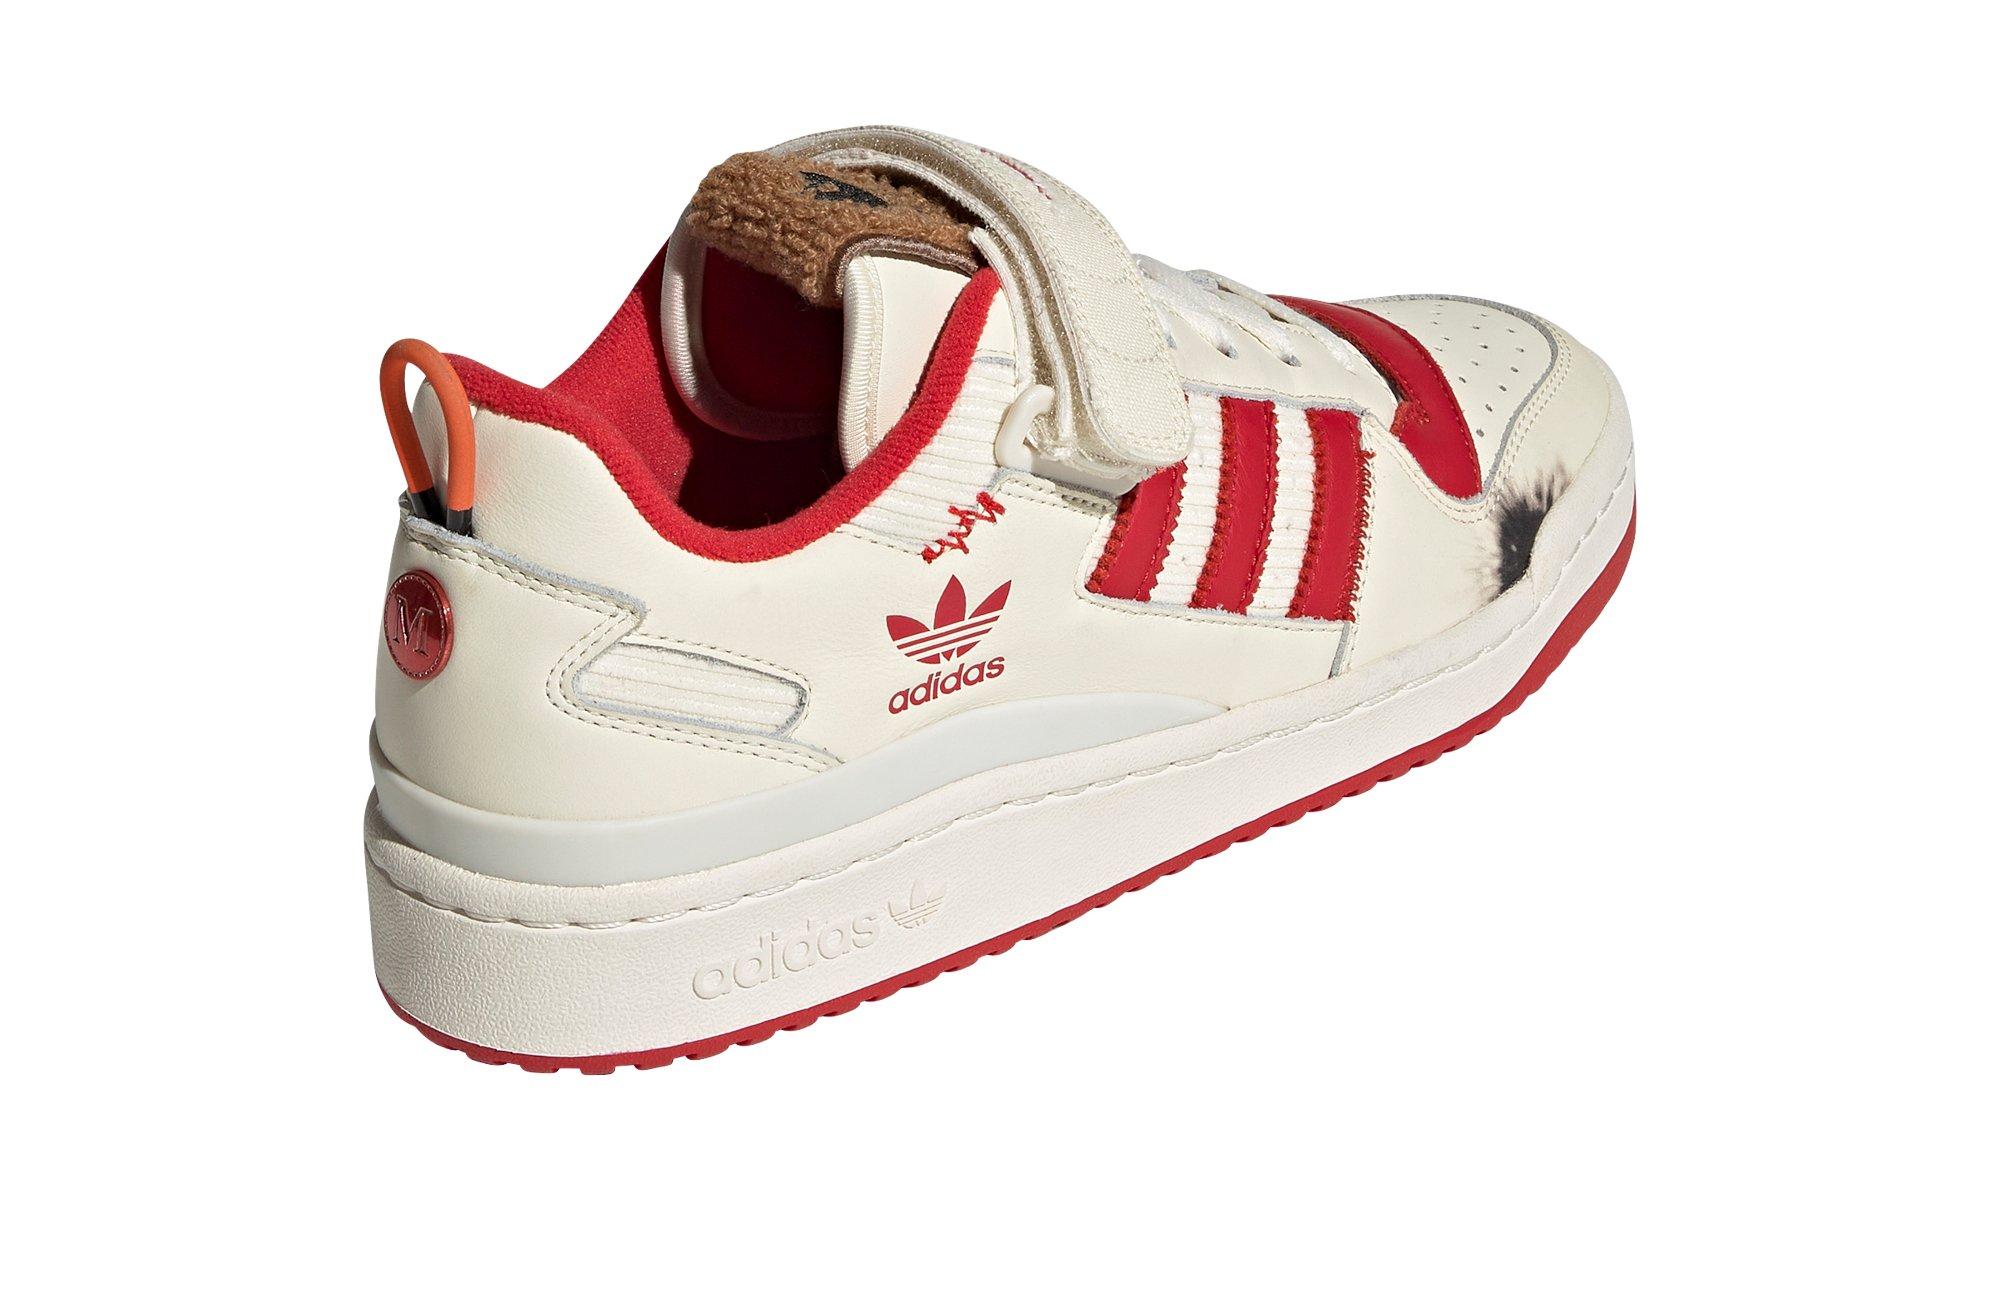 Sneakers Release – adidas x Forum Home Alone “Cream  White/Collegiate Red” Unisex Shoe Dropping 12/11